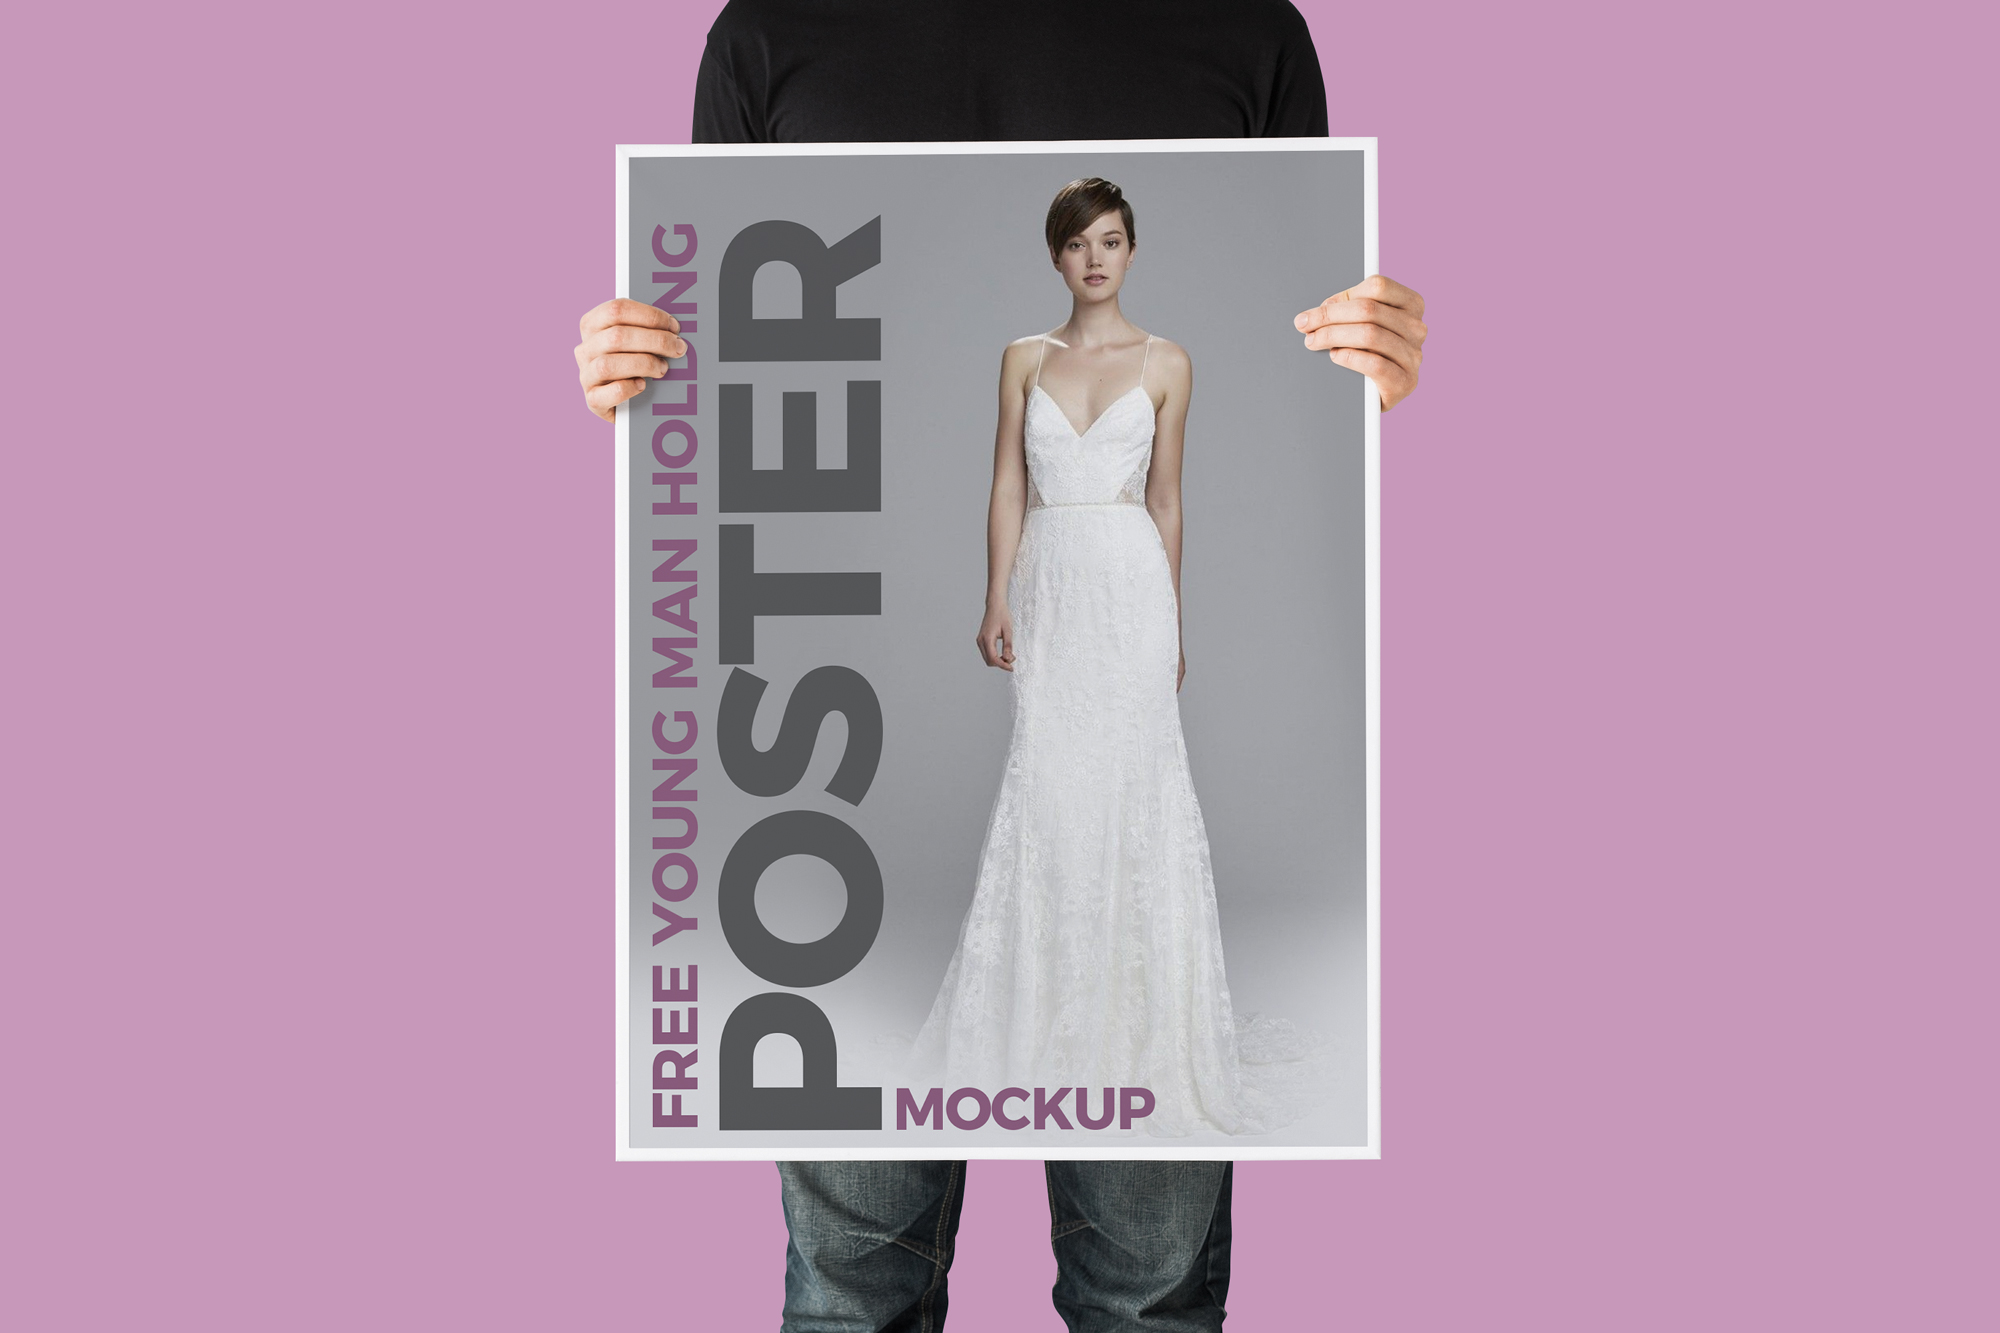 Free-Man-Holding-His-Hands-Poster-Mockup